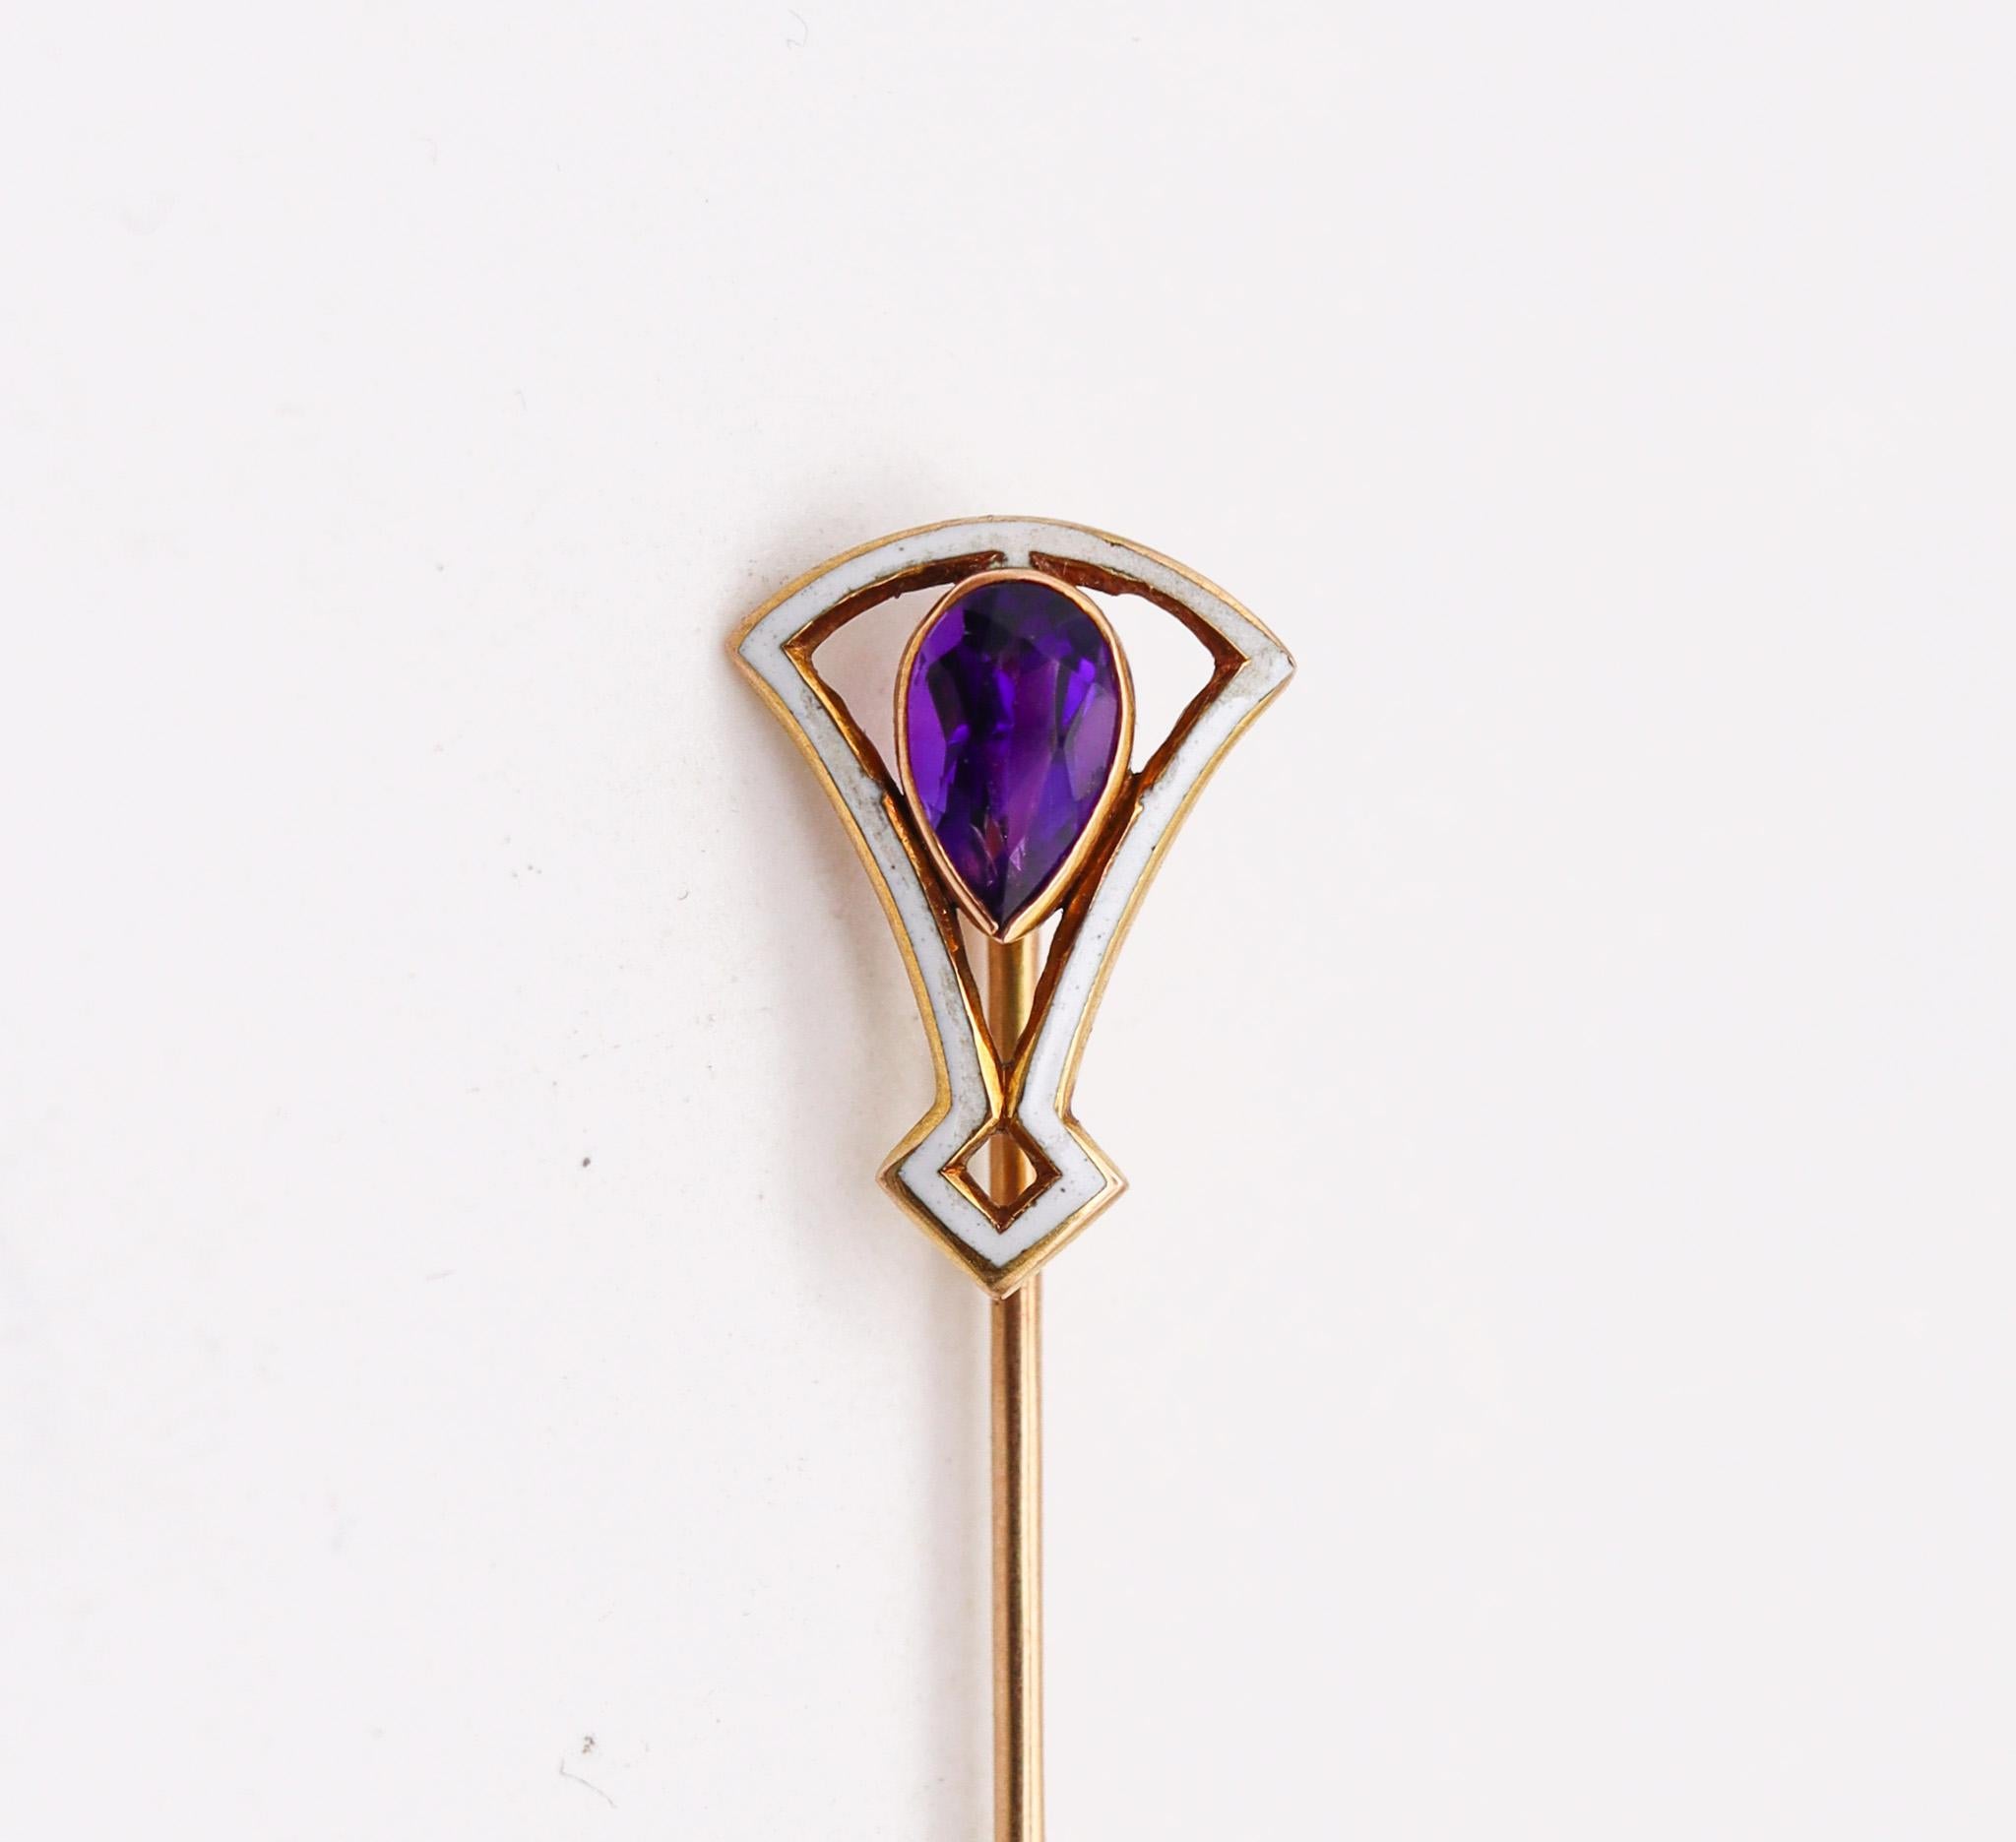 An art deco stick pin.

Beautiful colorful piece, created in America during the art deco period, back in the 1920. This antique pin has been crafted with geometric patterns in solid yellow gold of 14 karats with high polished finish. It is